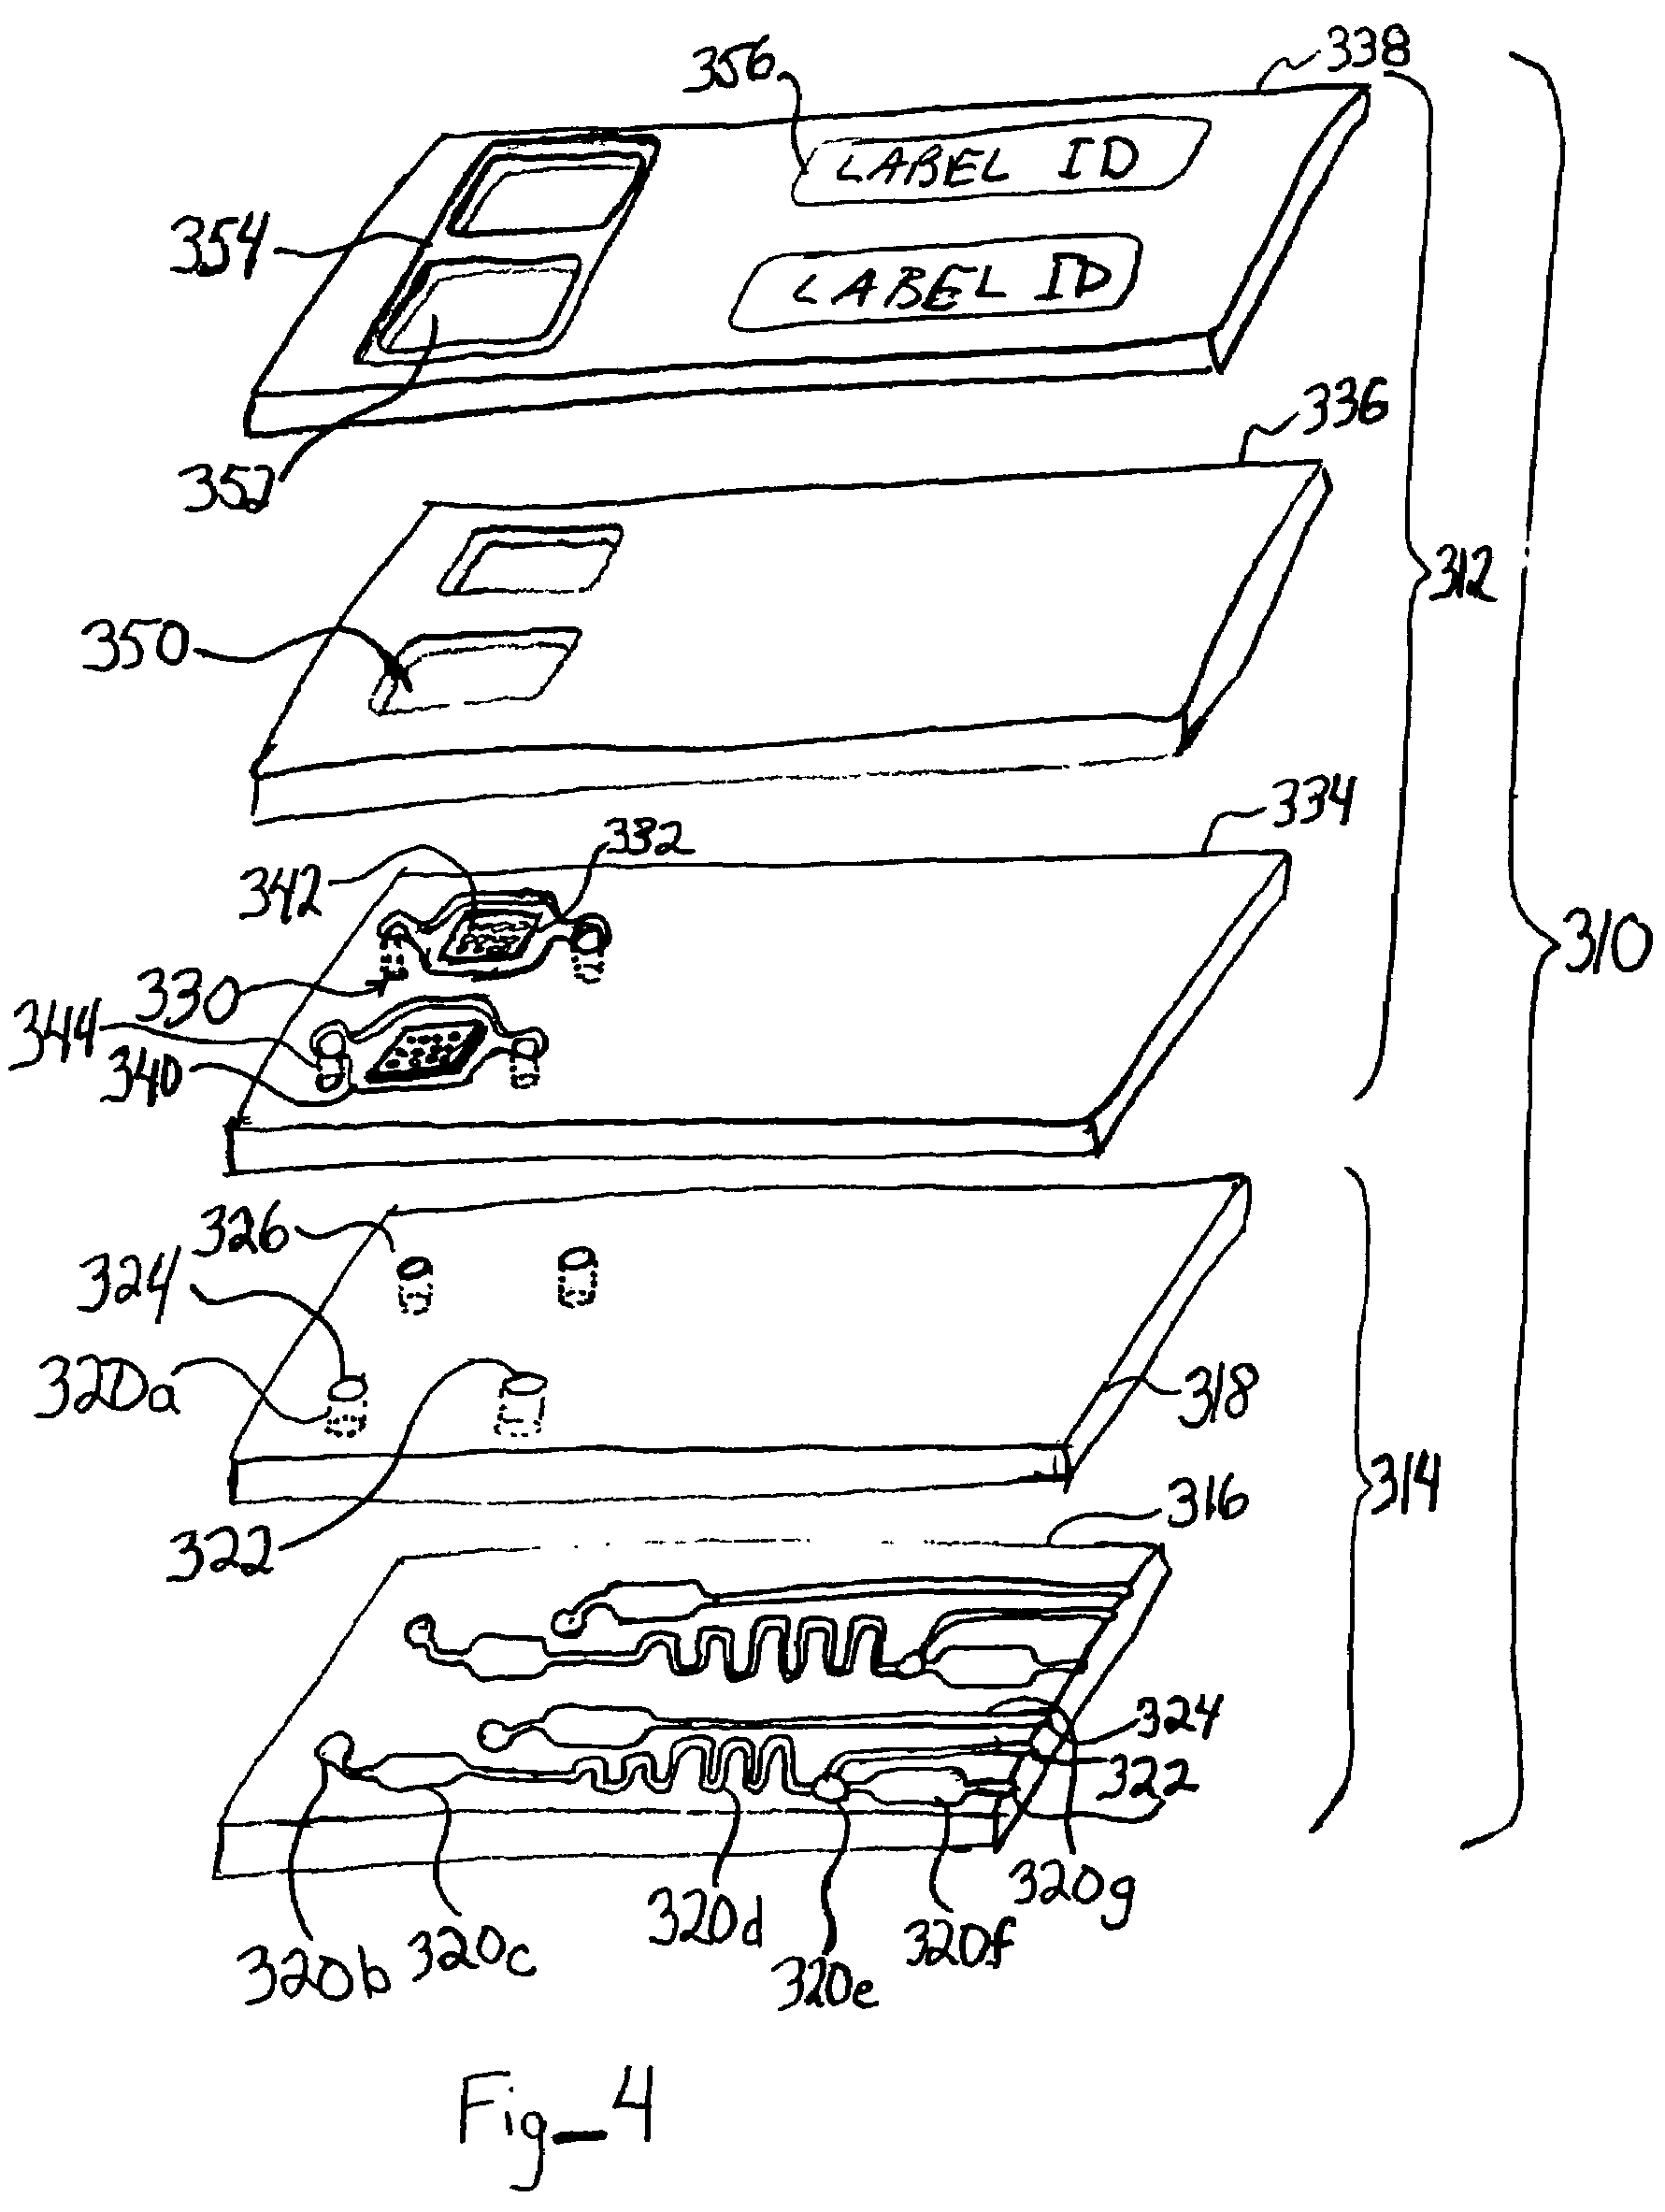 Test strips including flexible array substrates and method of hybridization